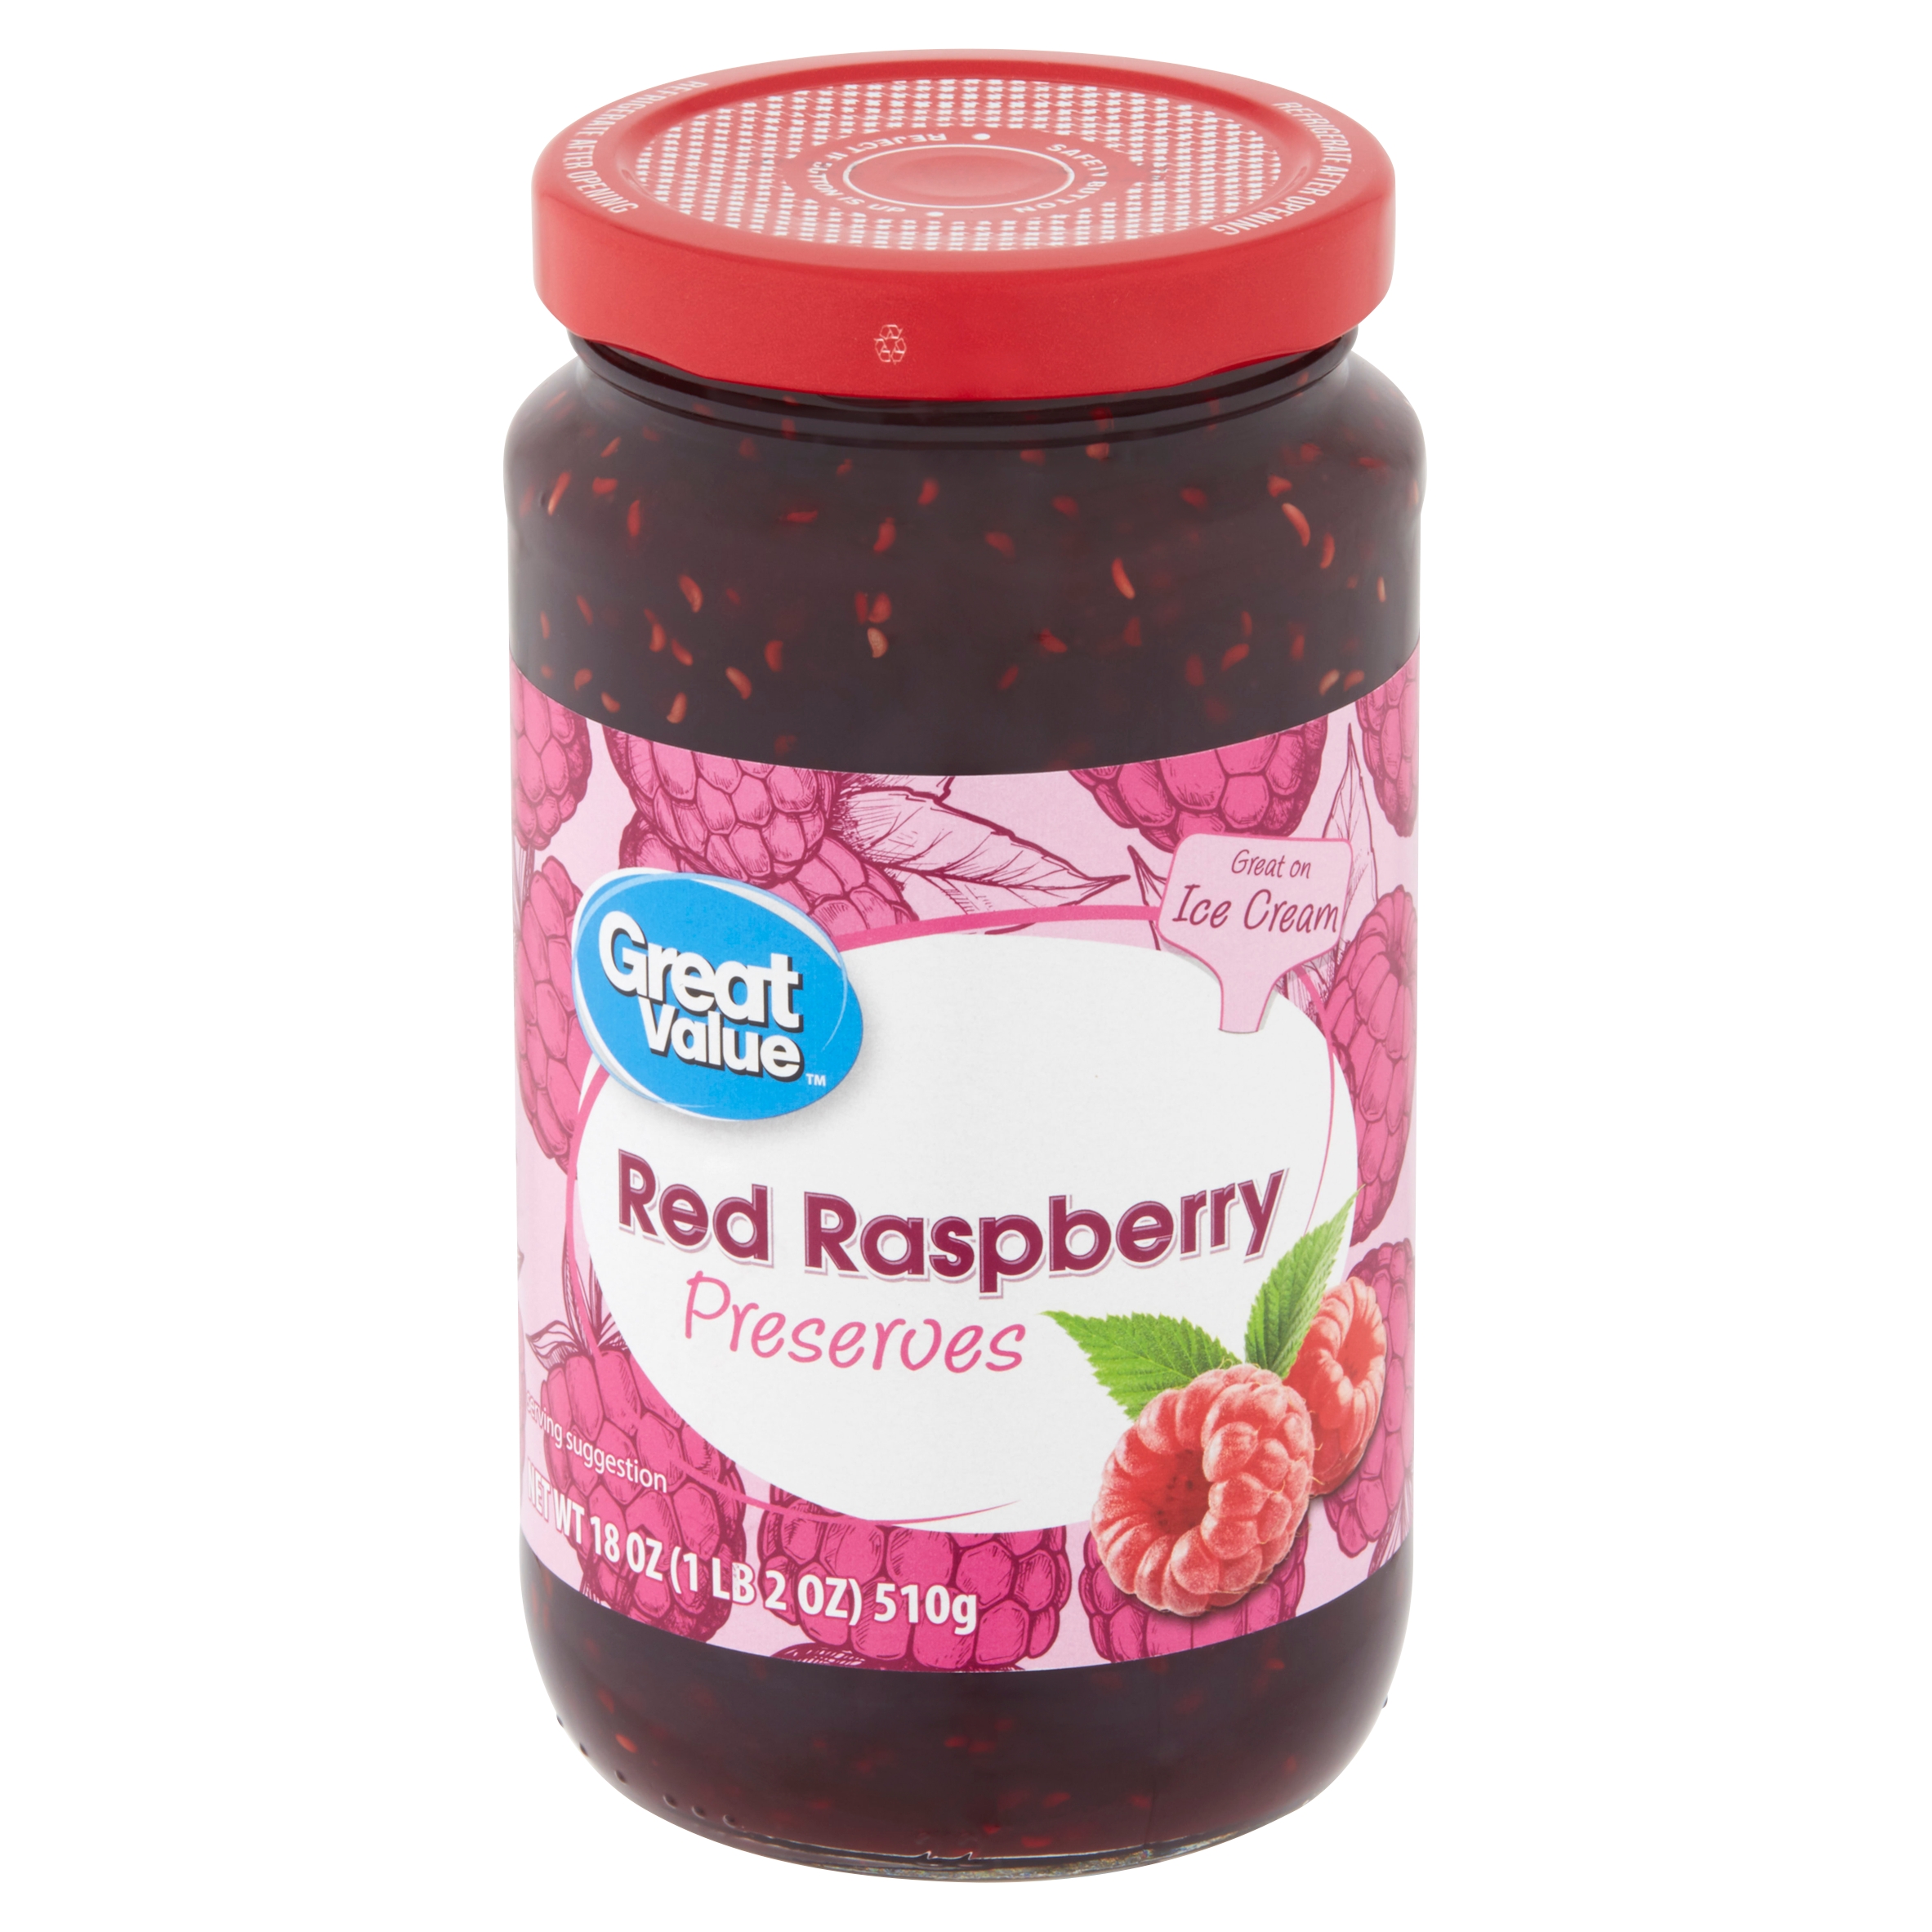 Great Value Red Raspberry Preserves, 18 Oz Image